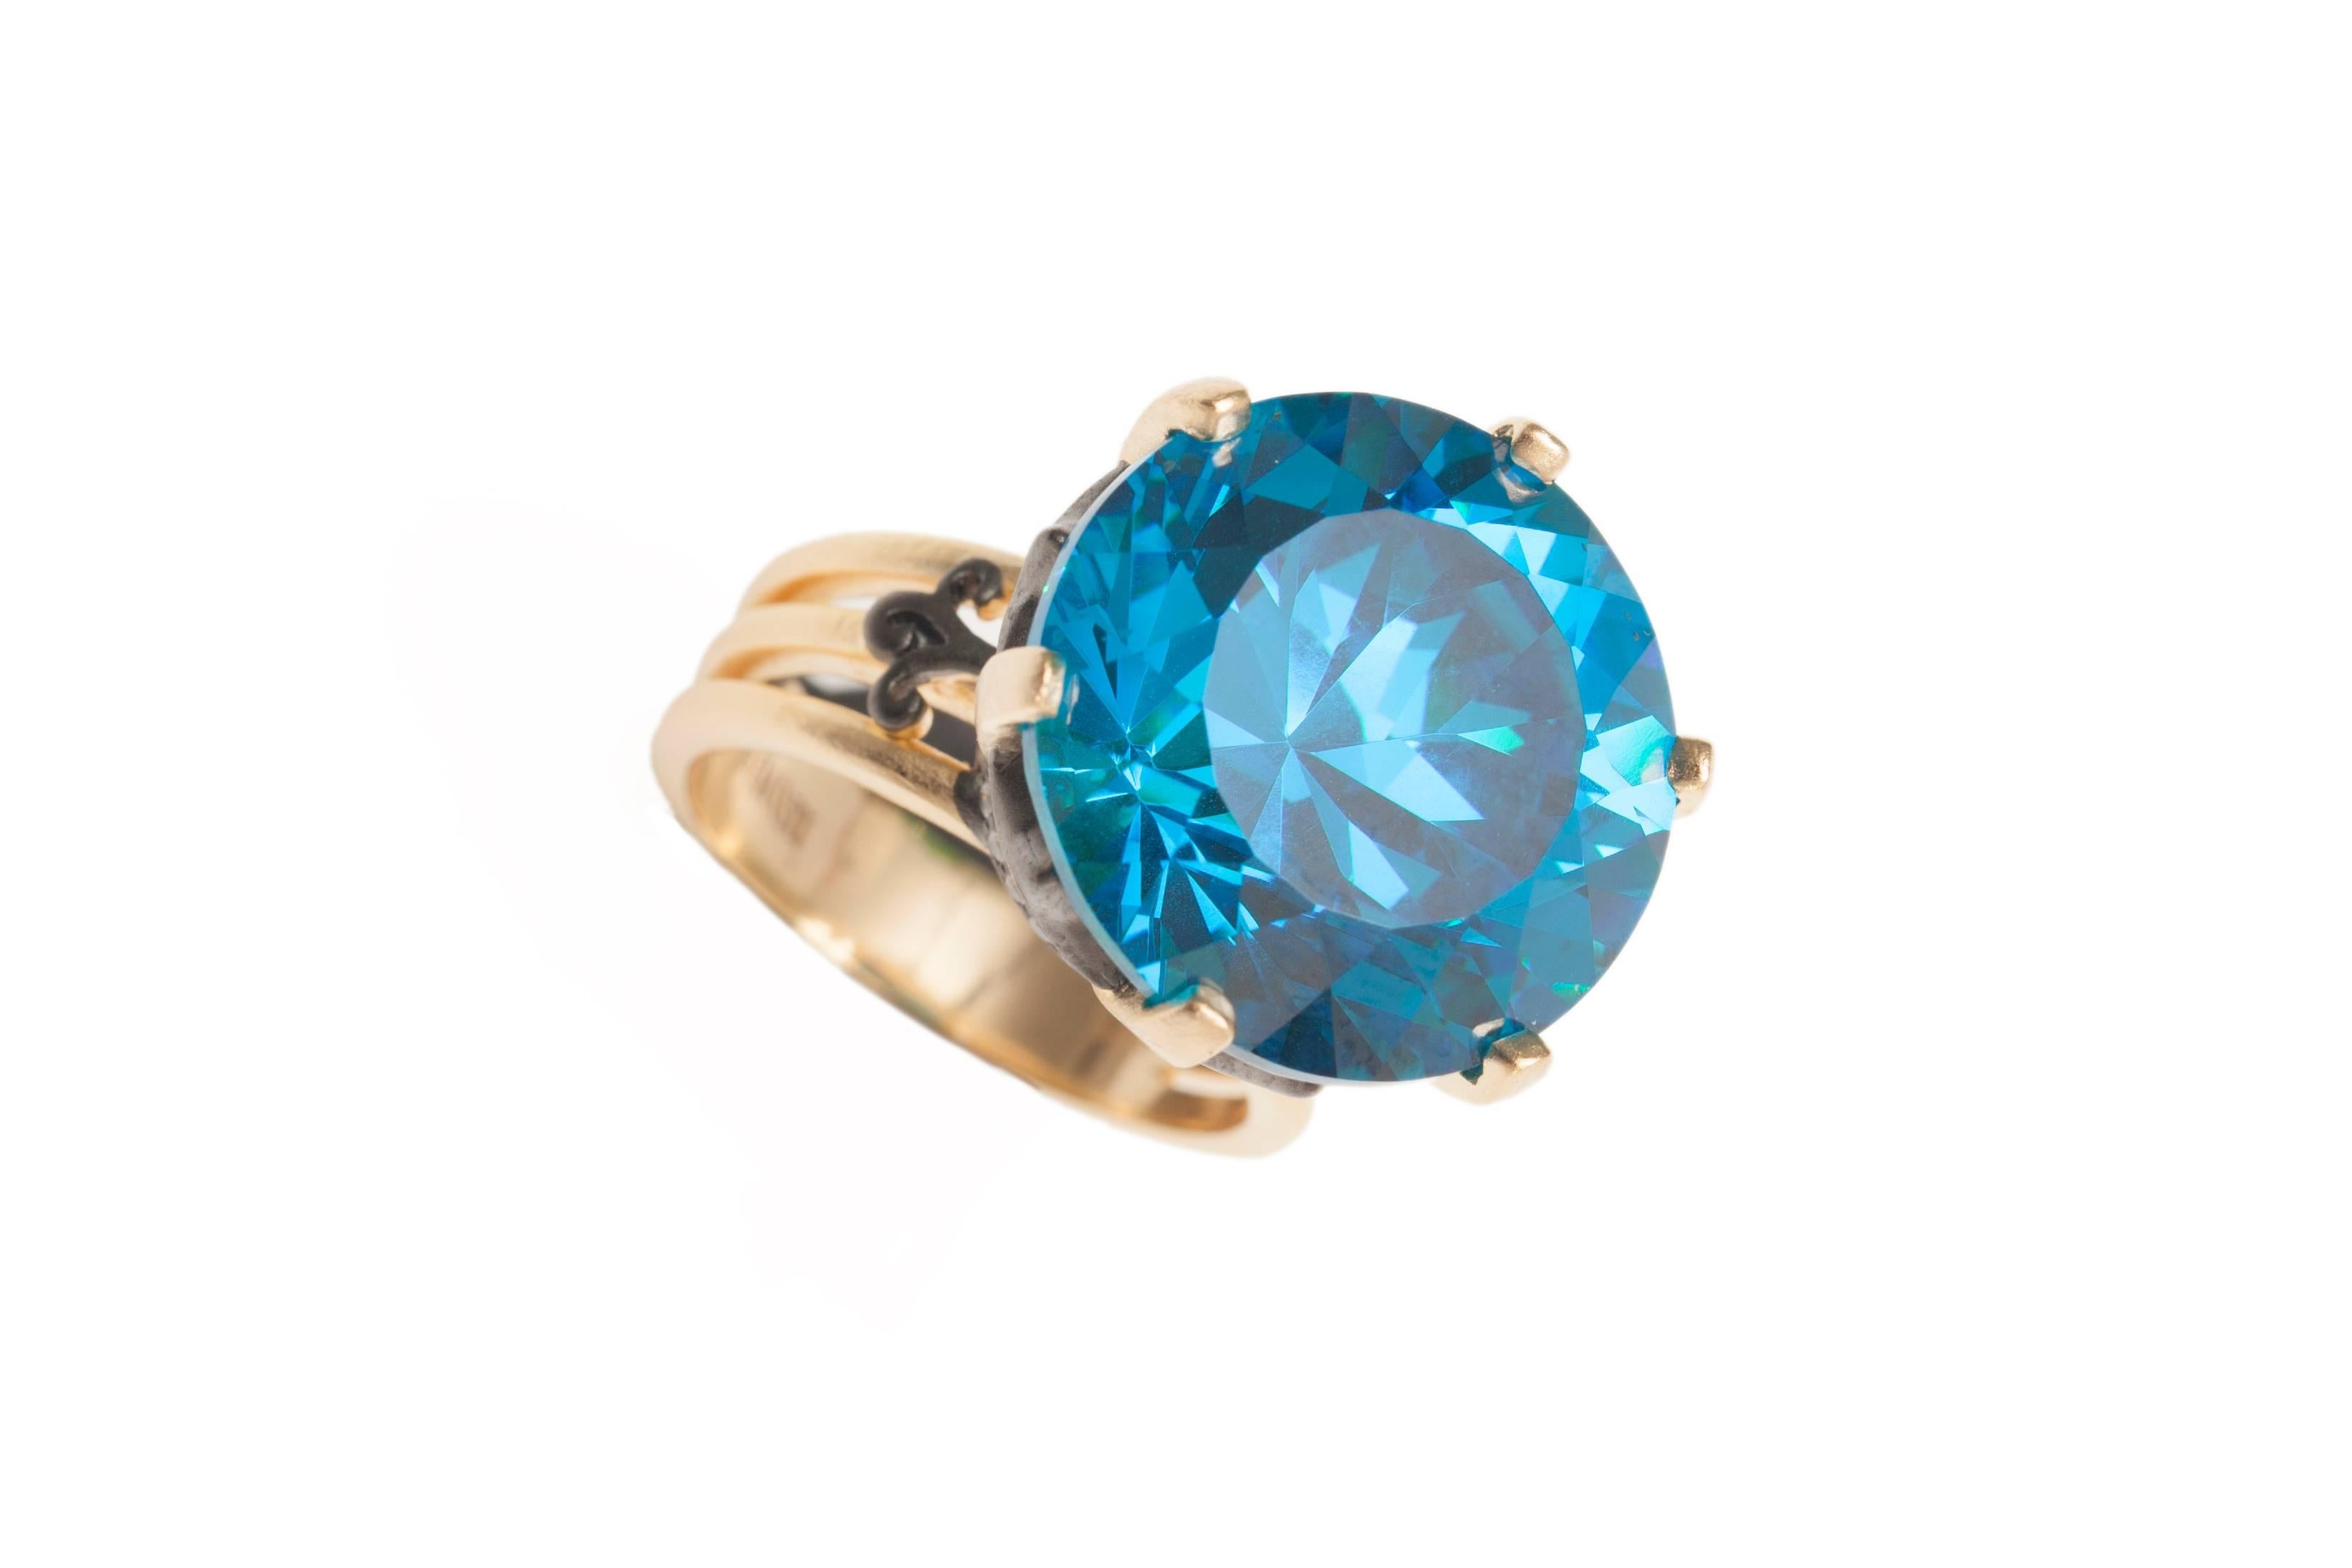 Blue topaz a symbol of love and affection; an18mm hand cut on vermeil gold and black ruthenium ring. Our Sa'mma statement ring is masterfully crafted to reflect elegance and class!
Size (6, 7,8) Special size per request